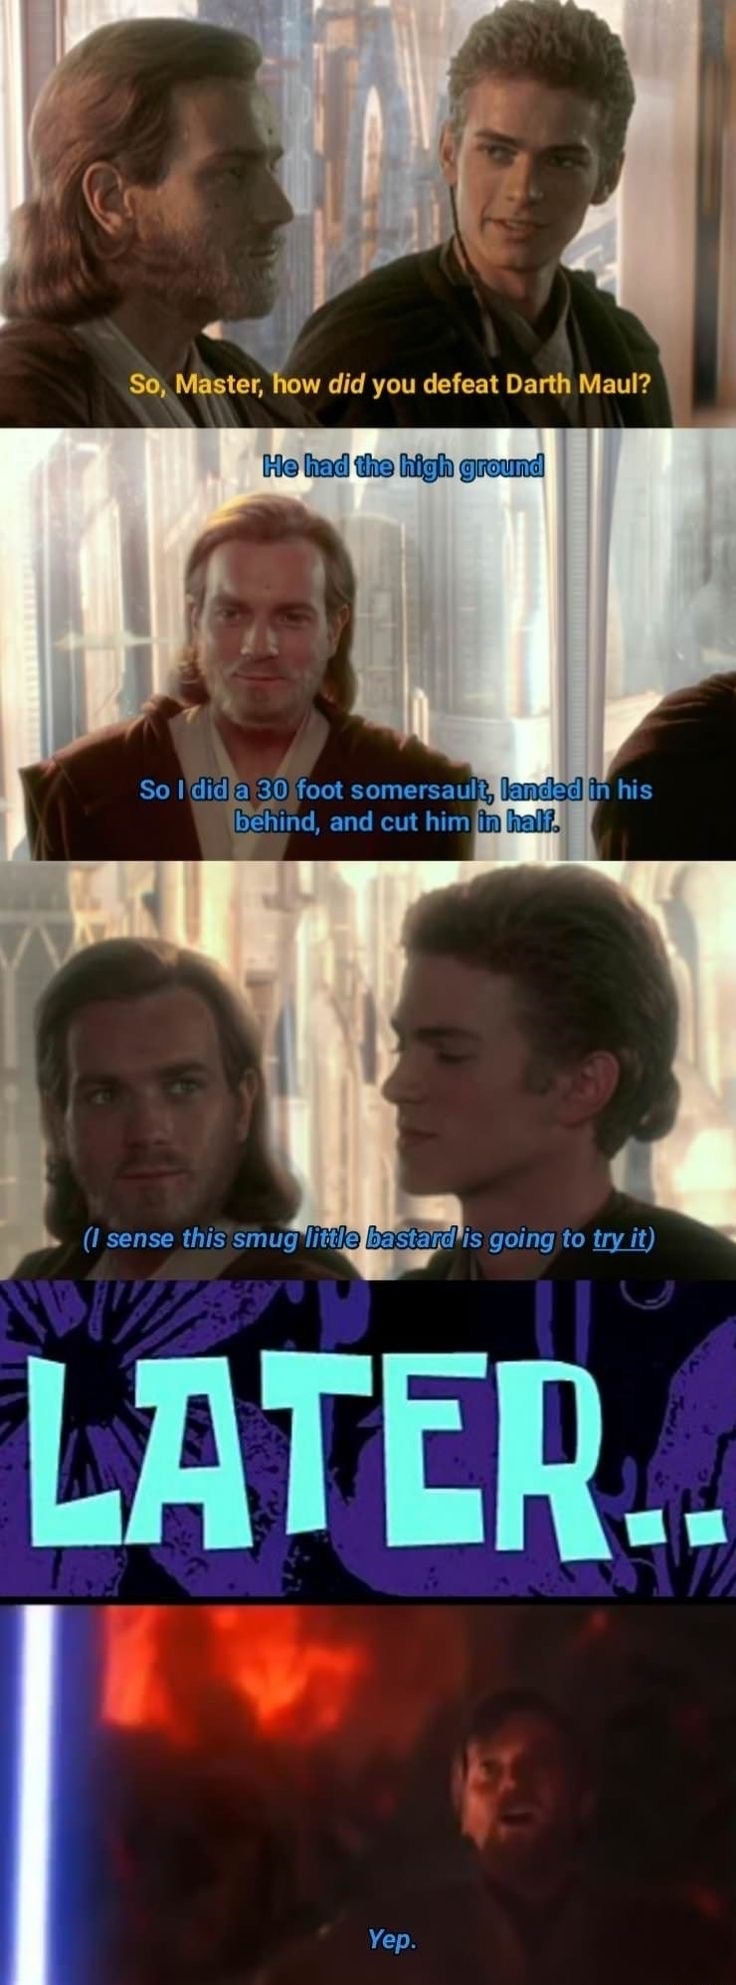 star wars anakin memes - So, Master, how did you defeat Darth Maul? He had the high ground So I did a 30 foot somersault, landed in his behind, and cut him in half. I sense this smug little bastard is going to try it Later.. Yep.